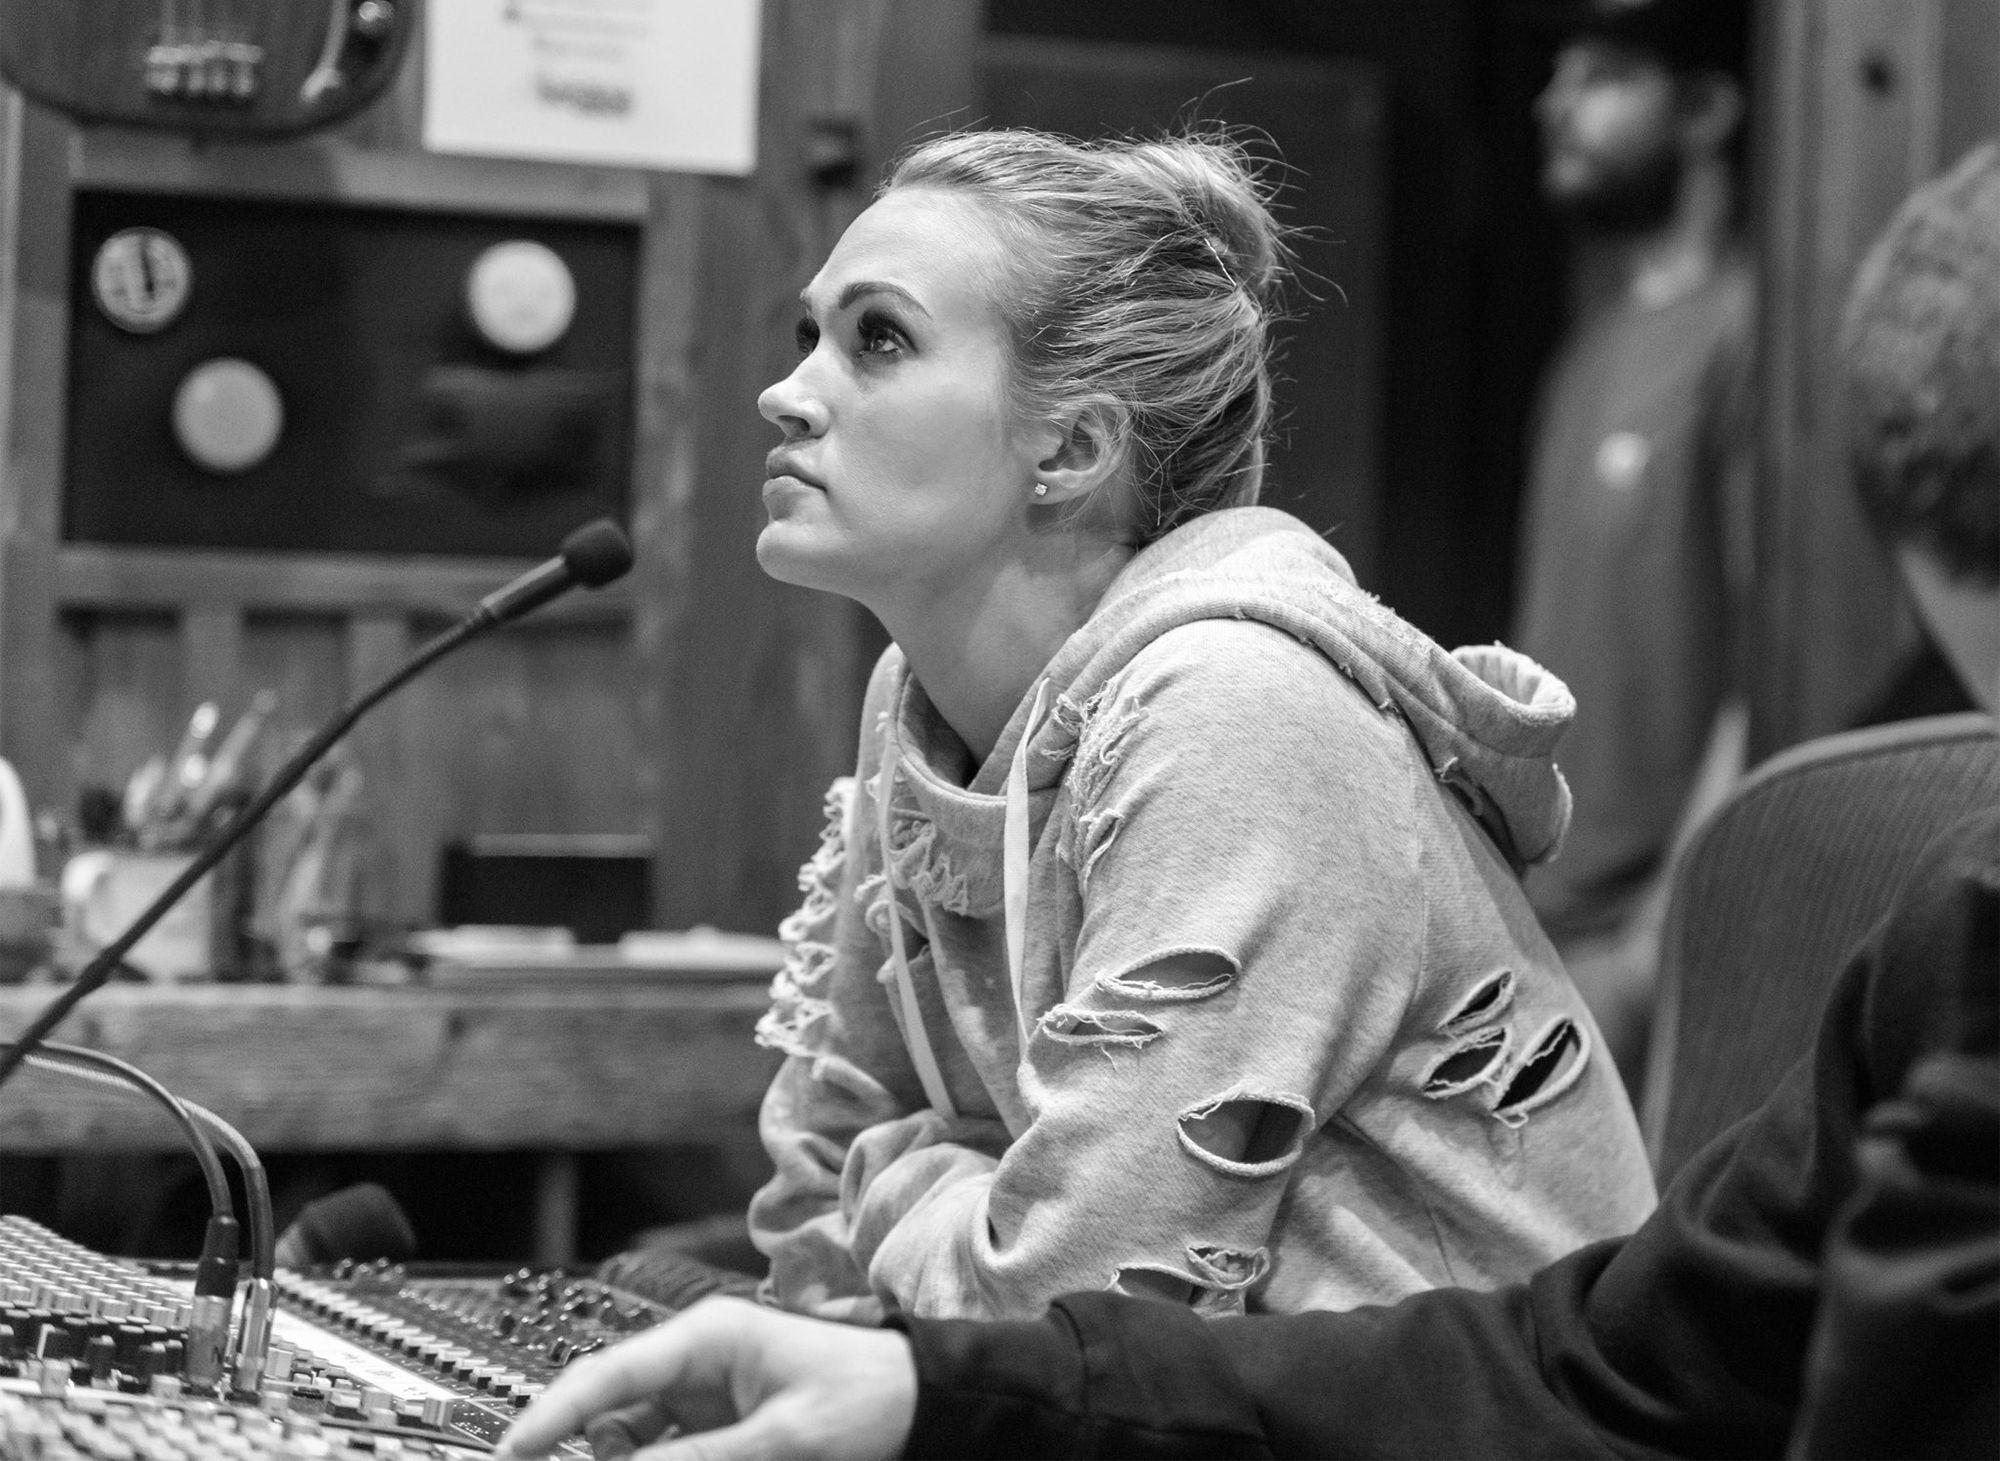 Carrie Underwood Black and White Logo - Carrie Underwood Reveals Half Her Face to Fans, Back in Studio ...